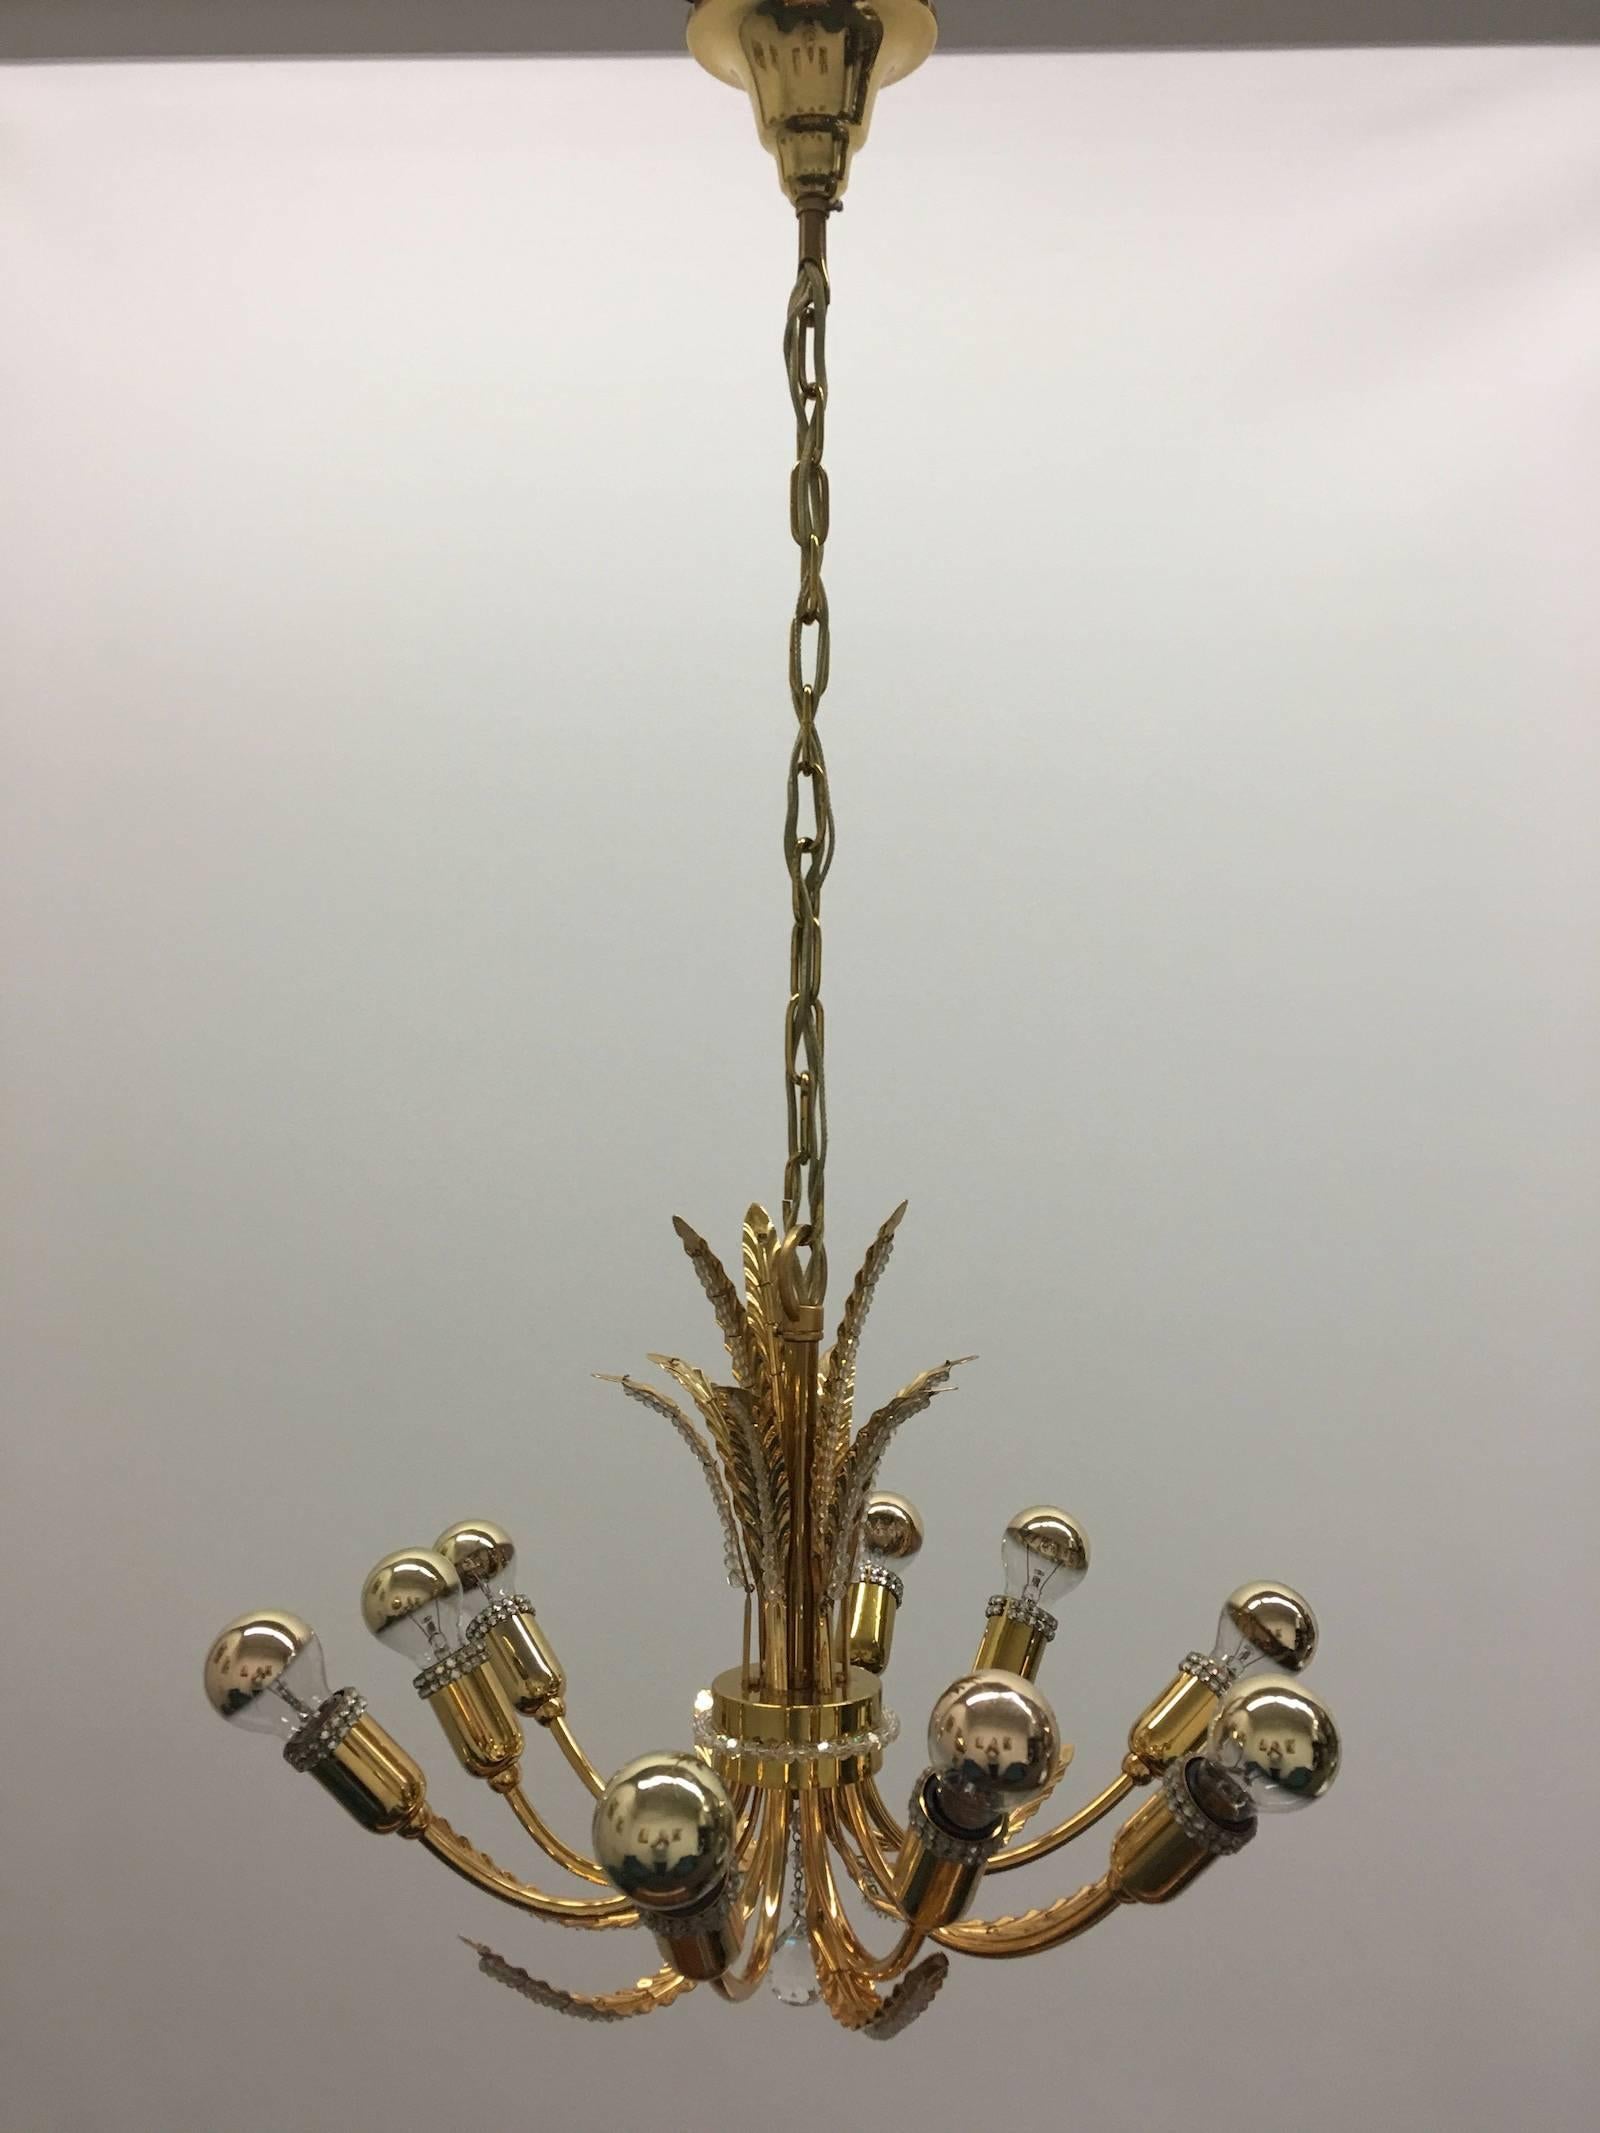 An absolutely stunning Mid-Century German gilt brass and cut crystal chandelier by Palwa, circa 1970s. Perfect for the Hollywood Regency style, there is no better combination than gold and crystal for the opulent, decadent and luxurious look of the